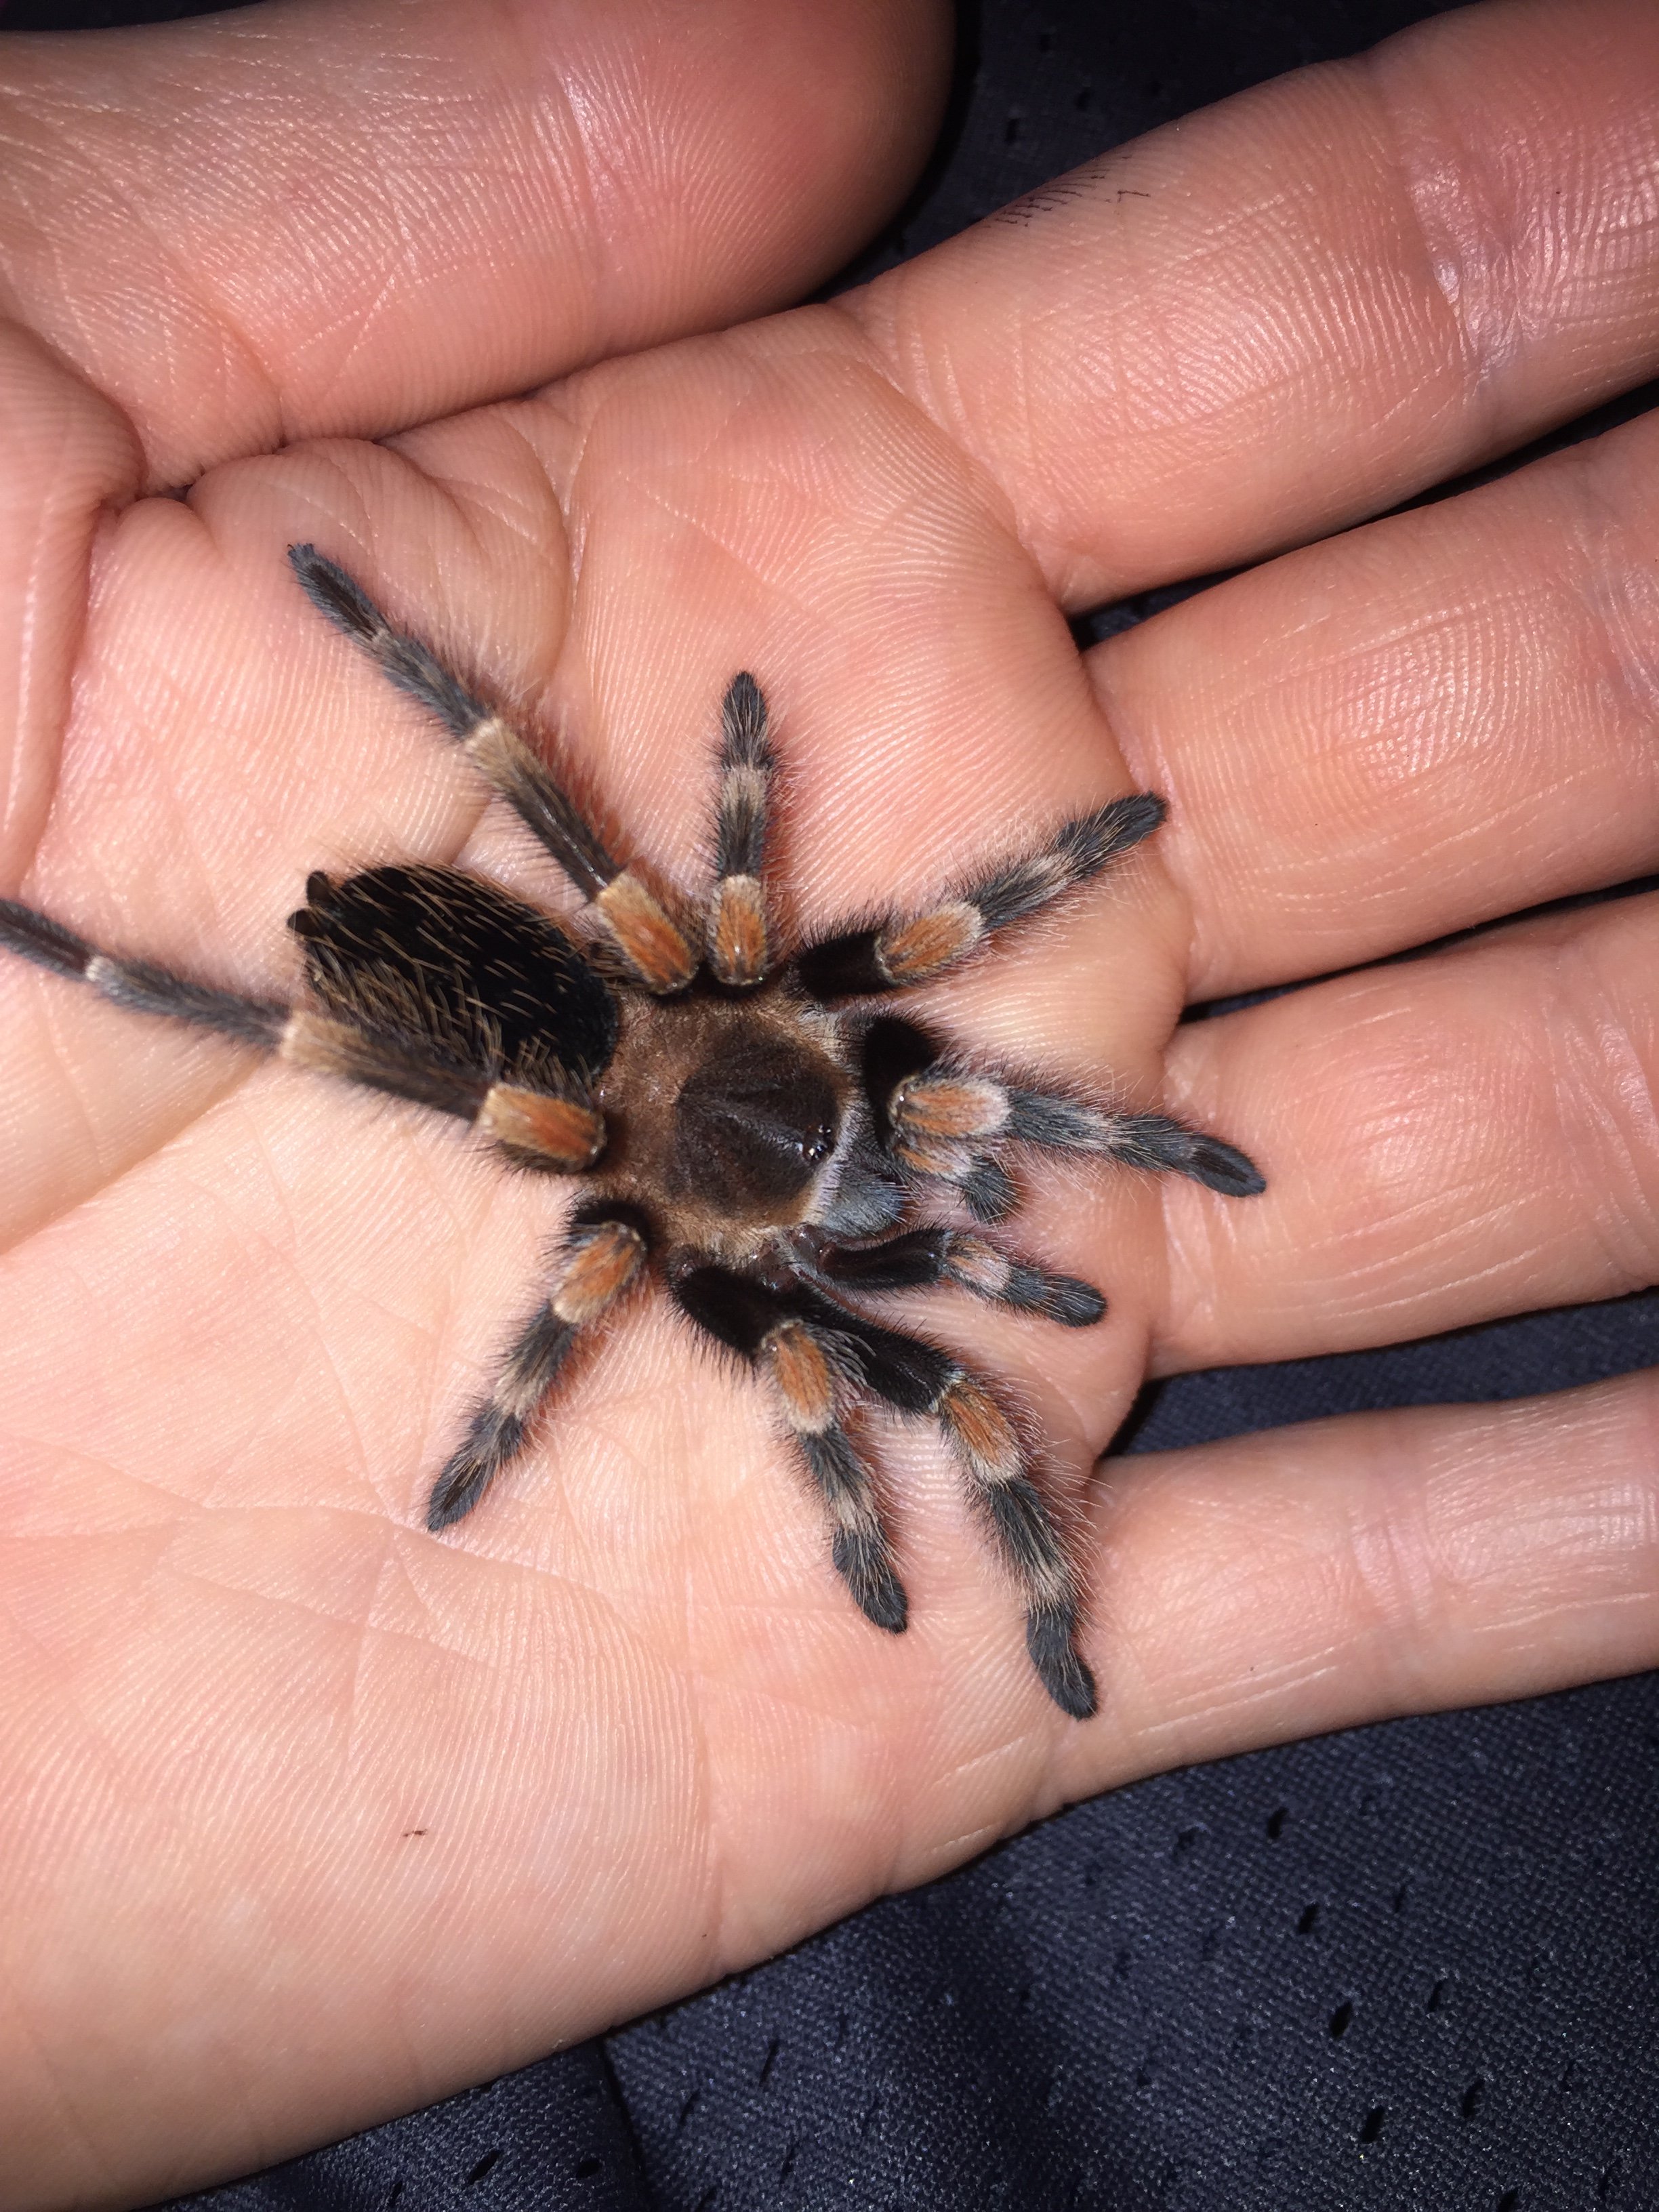 B smithi out after recouping from molt